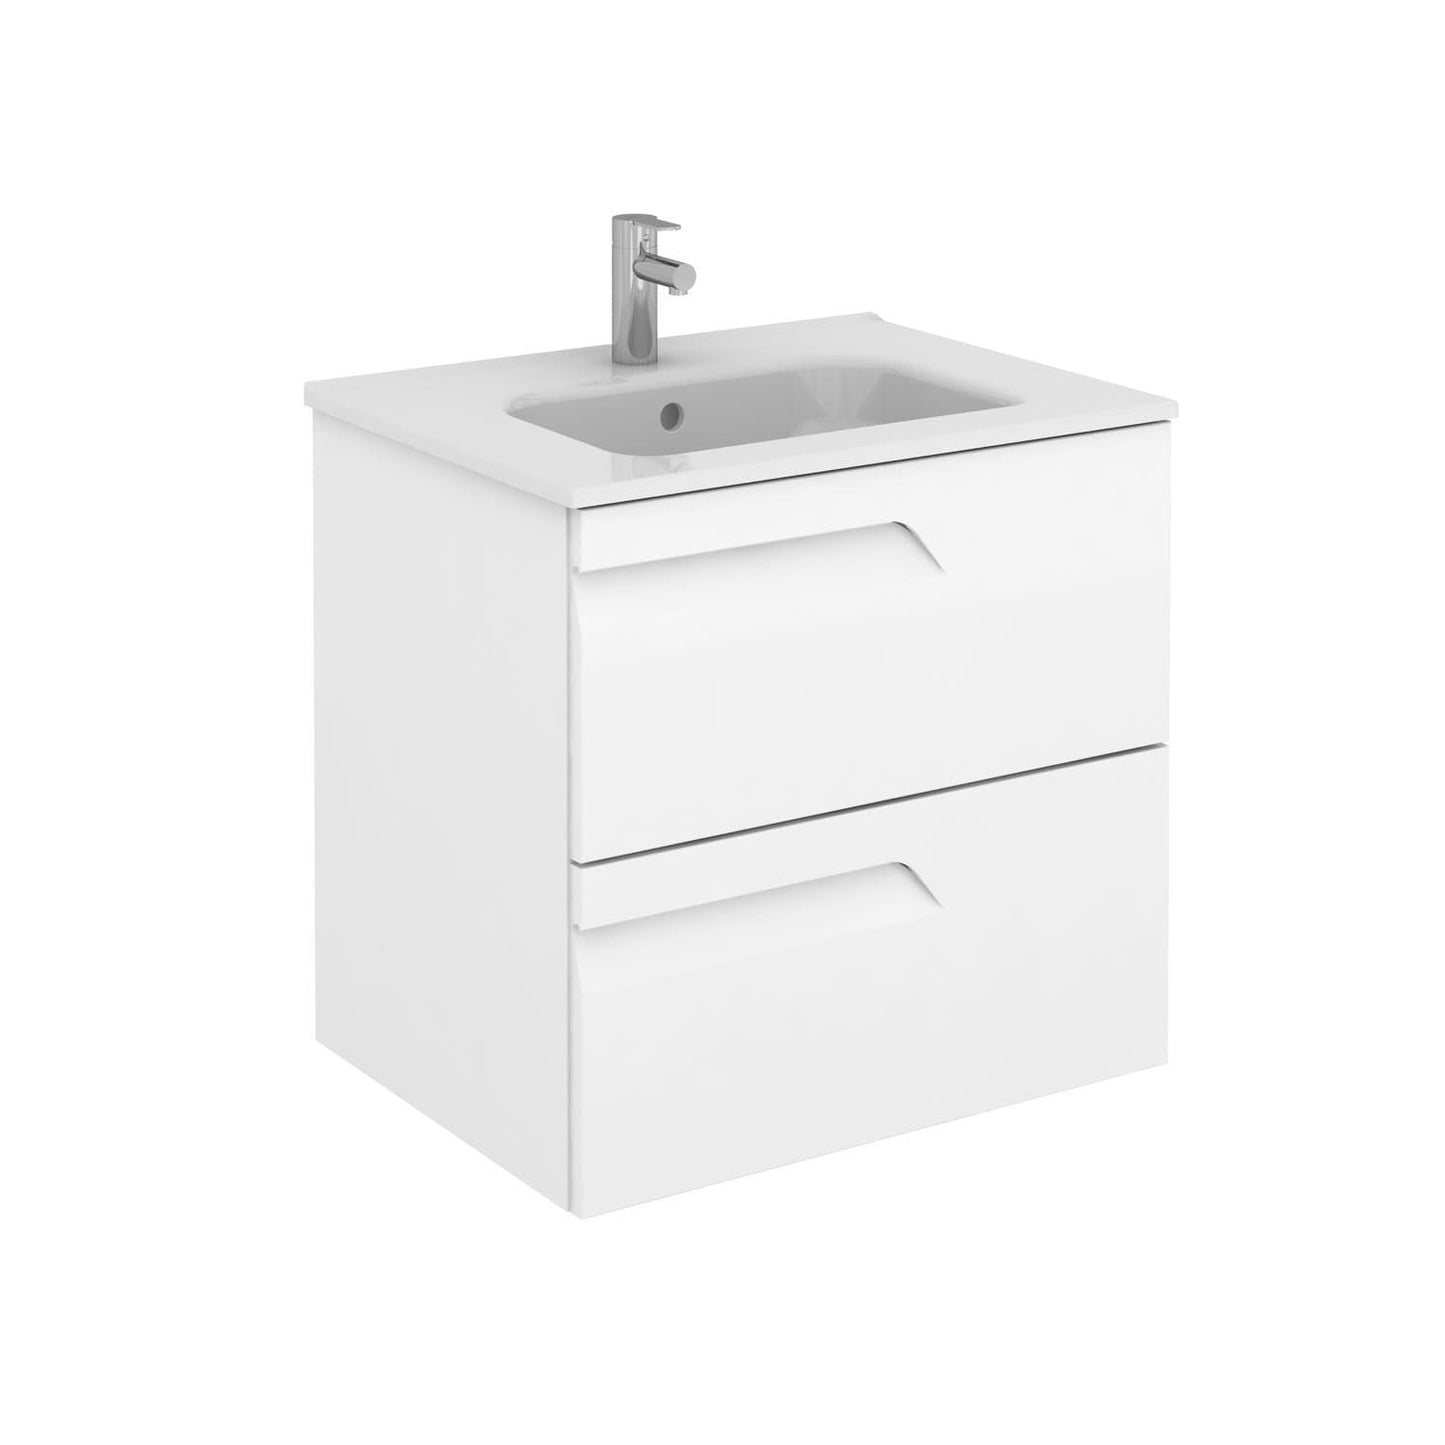 Vitale 24 inches Wall Mounted Modern Bathroom Vanity 2 Drawer White with basin